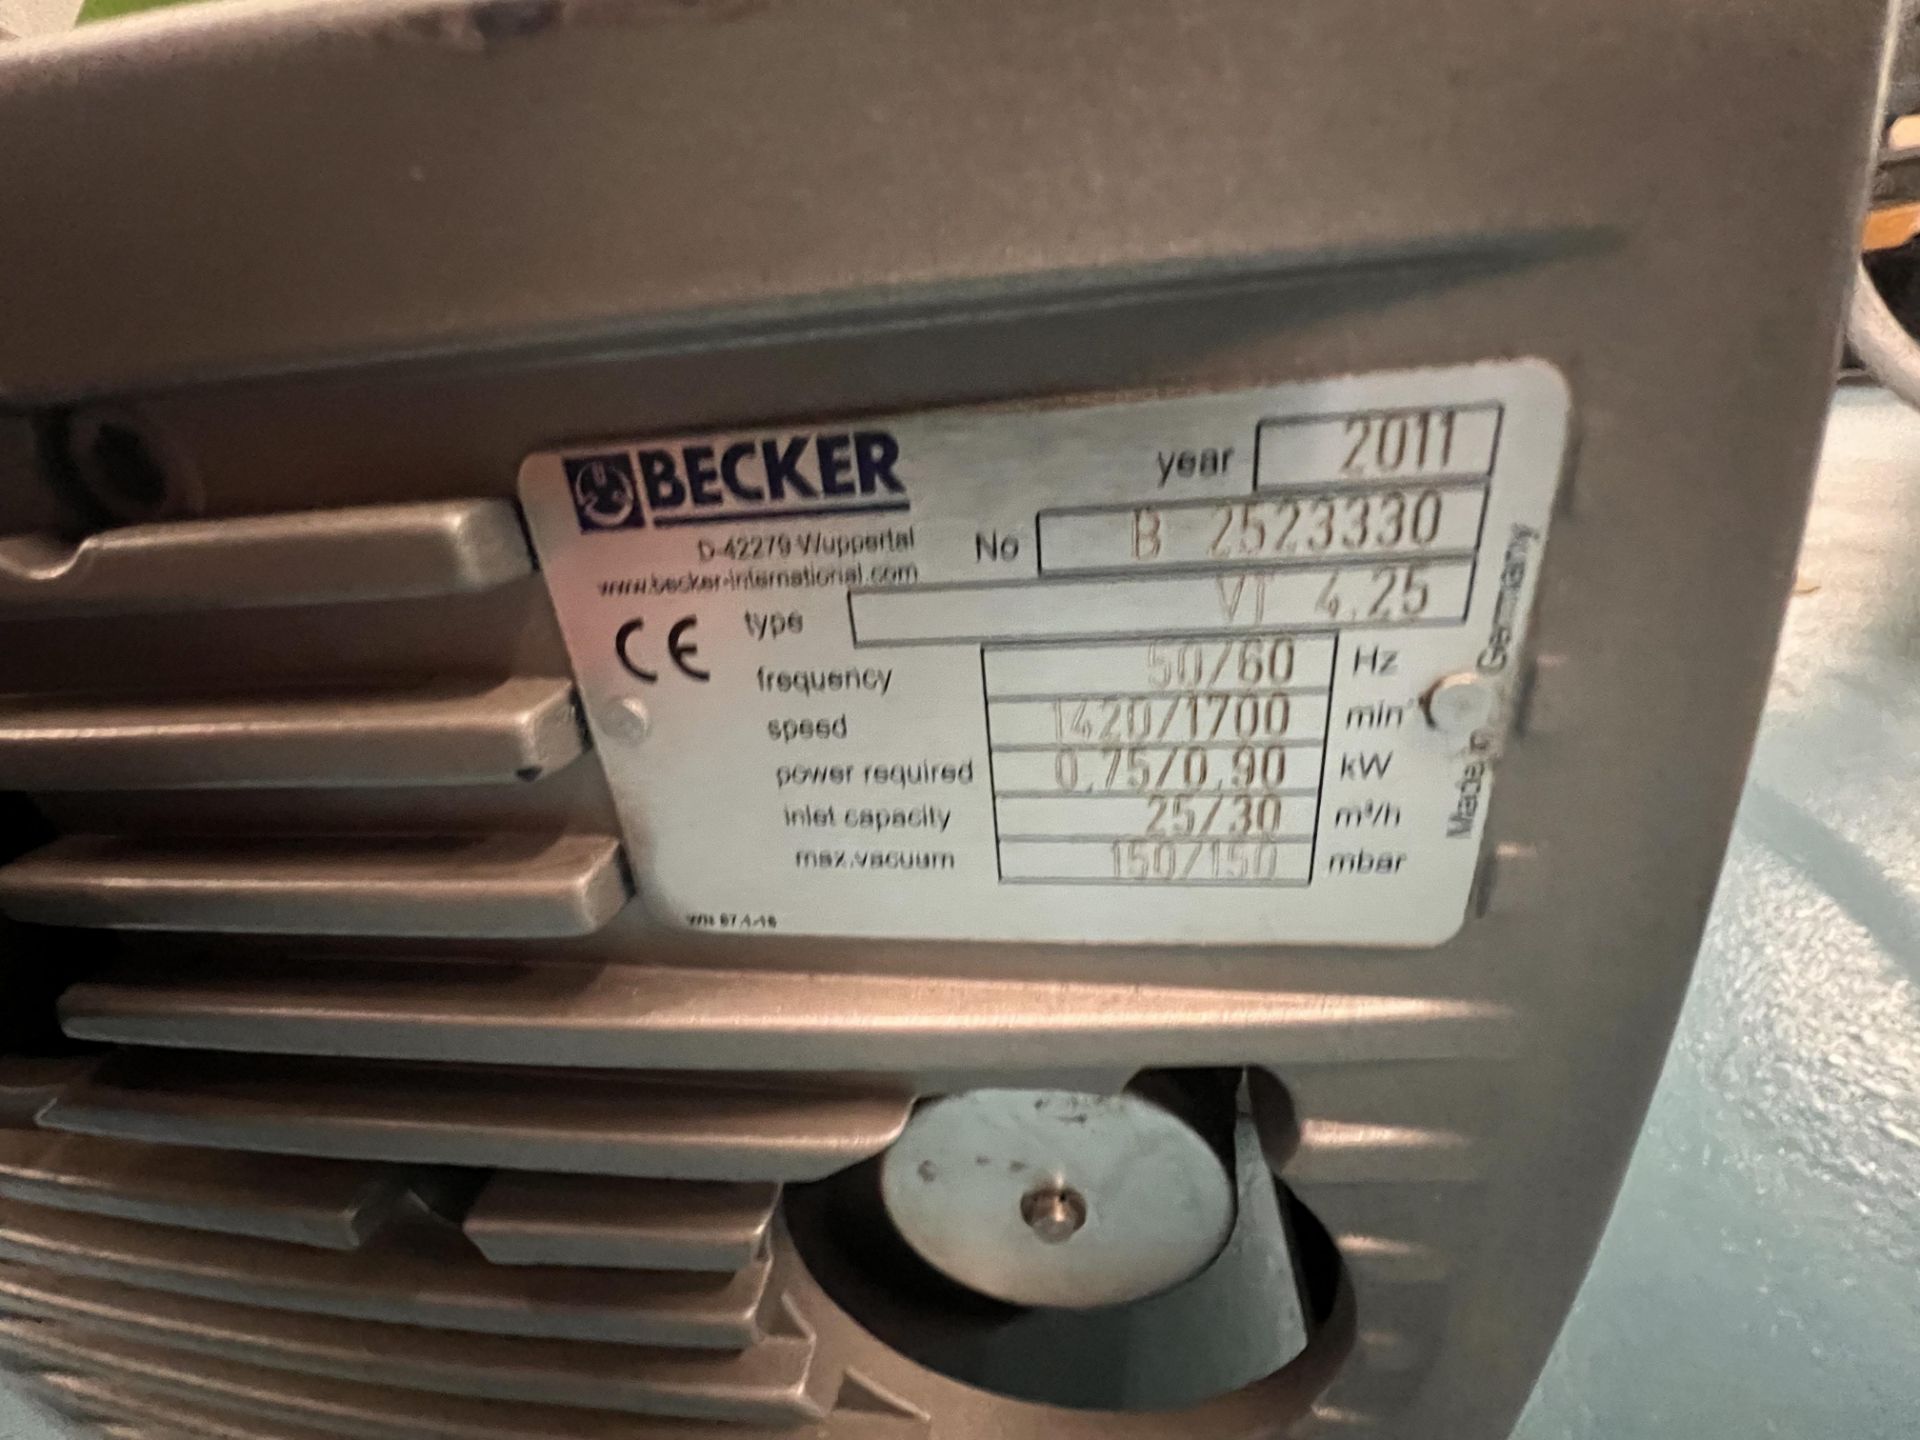 BECKER VACUUM PUMP, TYPE VT 4.25, S/N B2523330, BELIEVED TO BE NEW / NEVER INSTALLED - Image 5 of 7